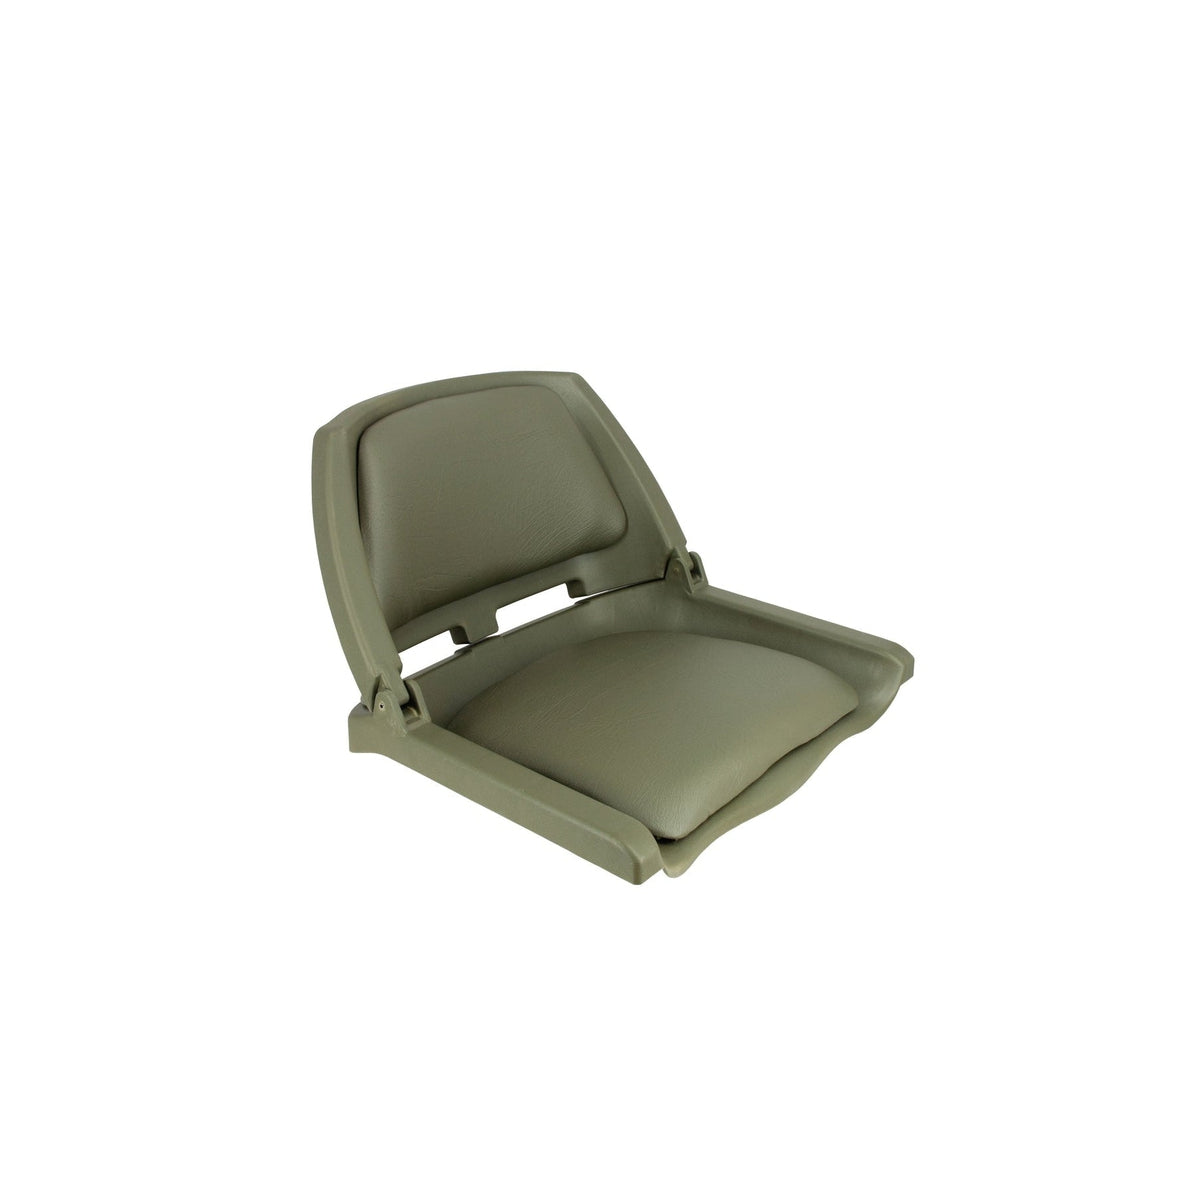 Springfield Not Qualified for Free Shipping Springfield Traveler Folding Seat Green with Green Cushion #1061105-C